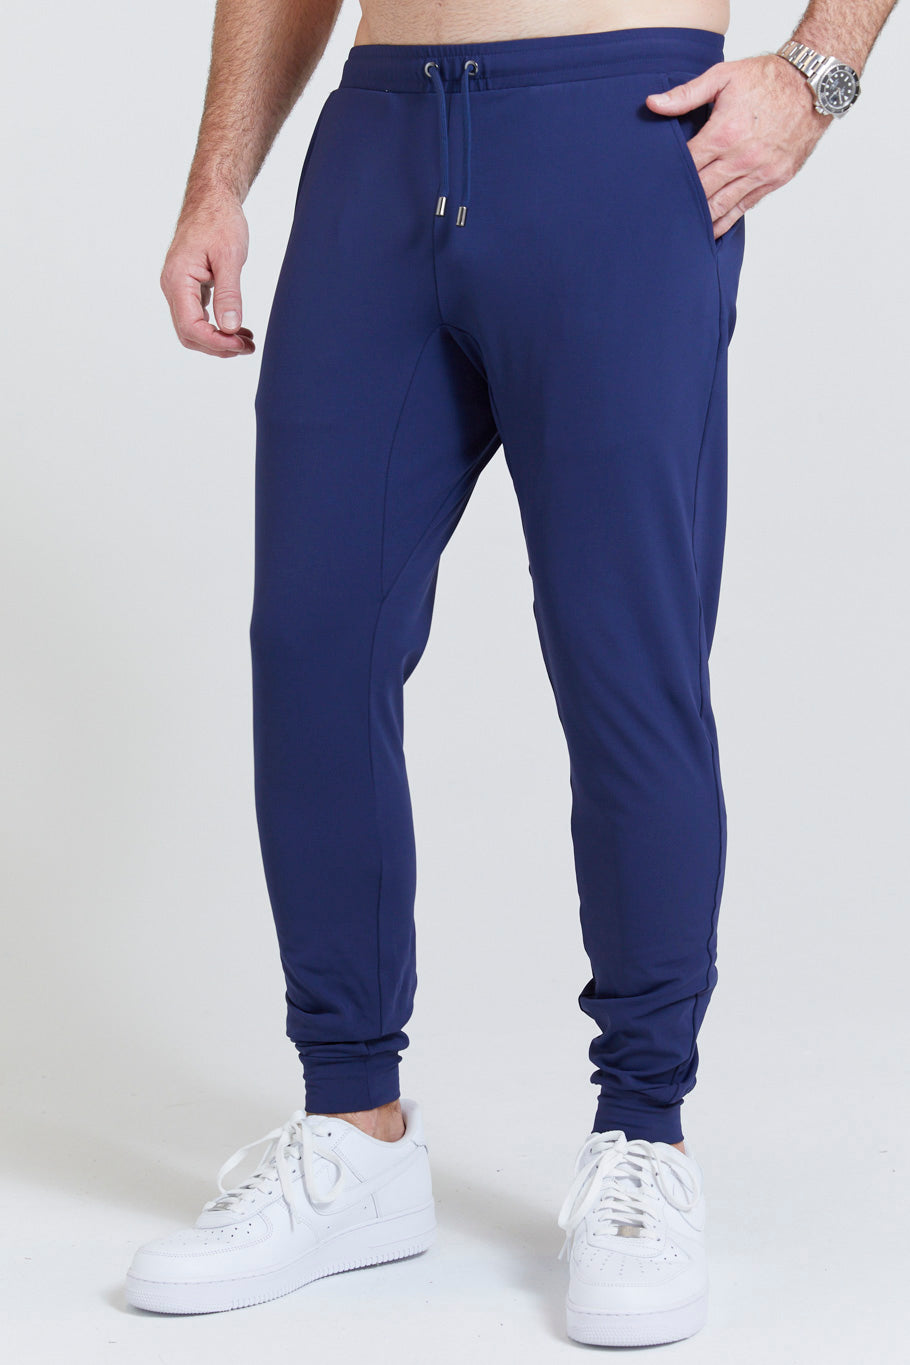 Image of the donahue jogger in navy